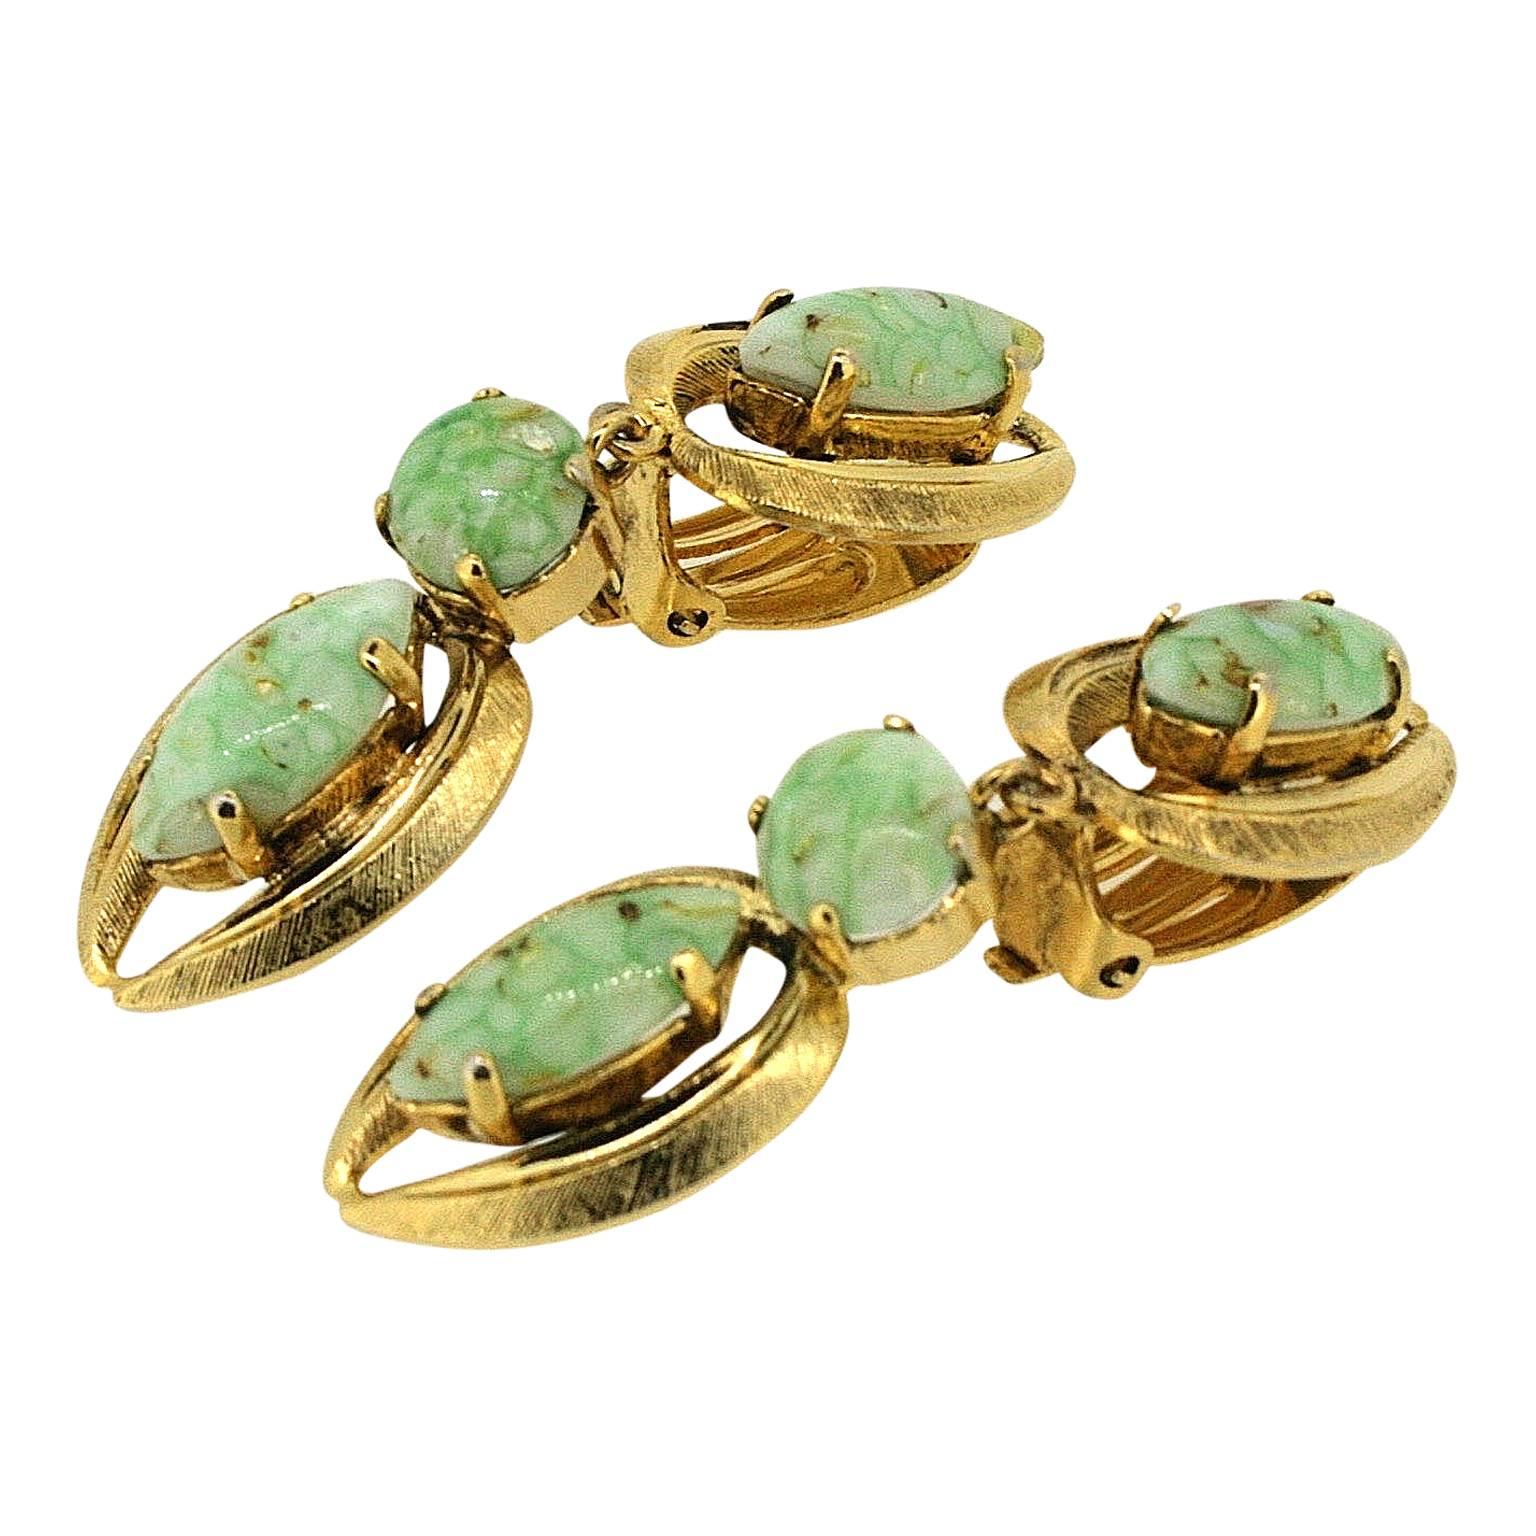 Christian Dior 1963 Green Marbled Glass Vintage Earrings In Excellent Condition For Sale In Wigan, GB